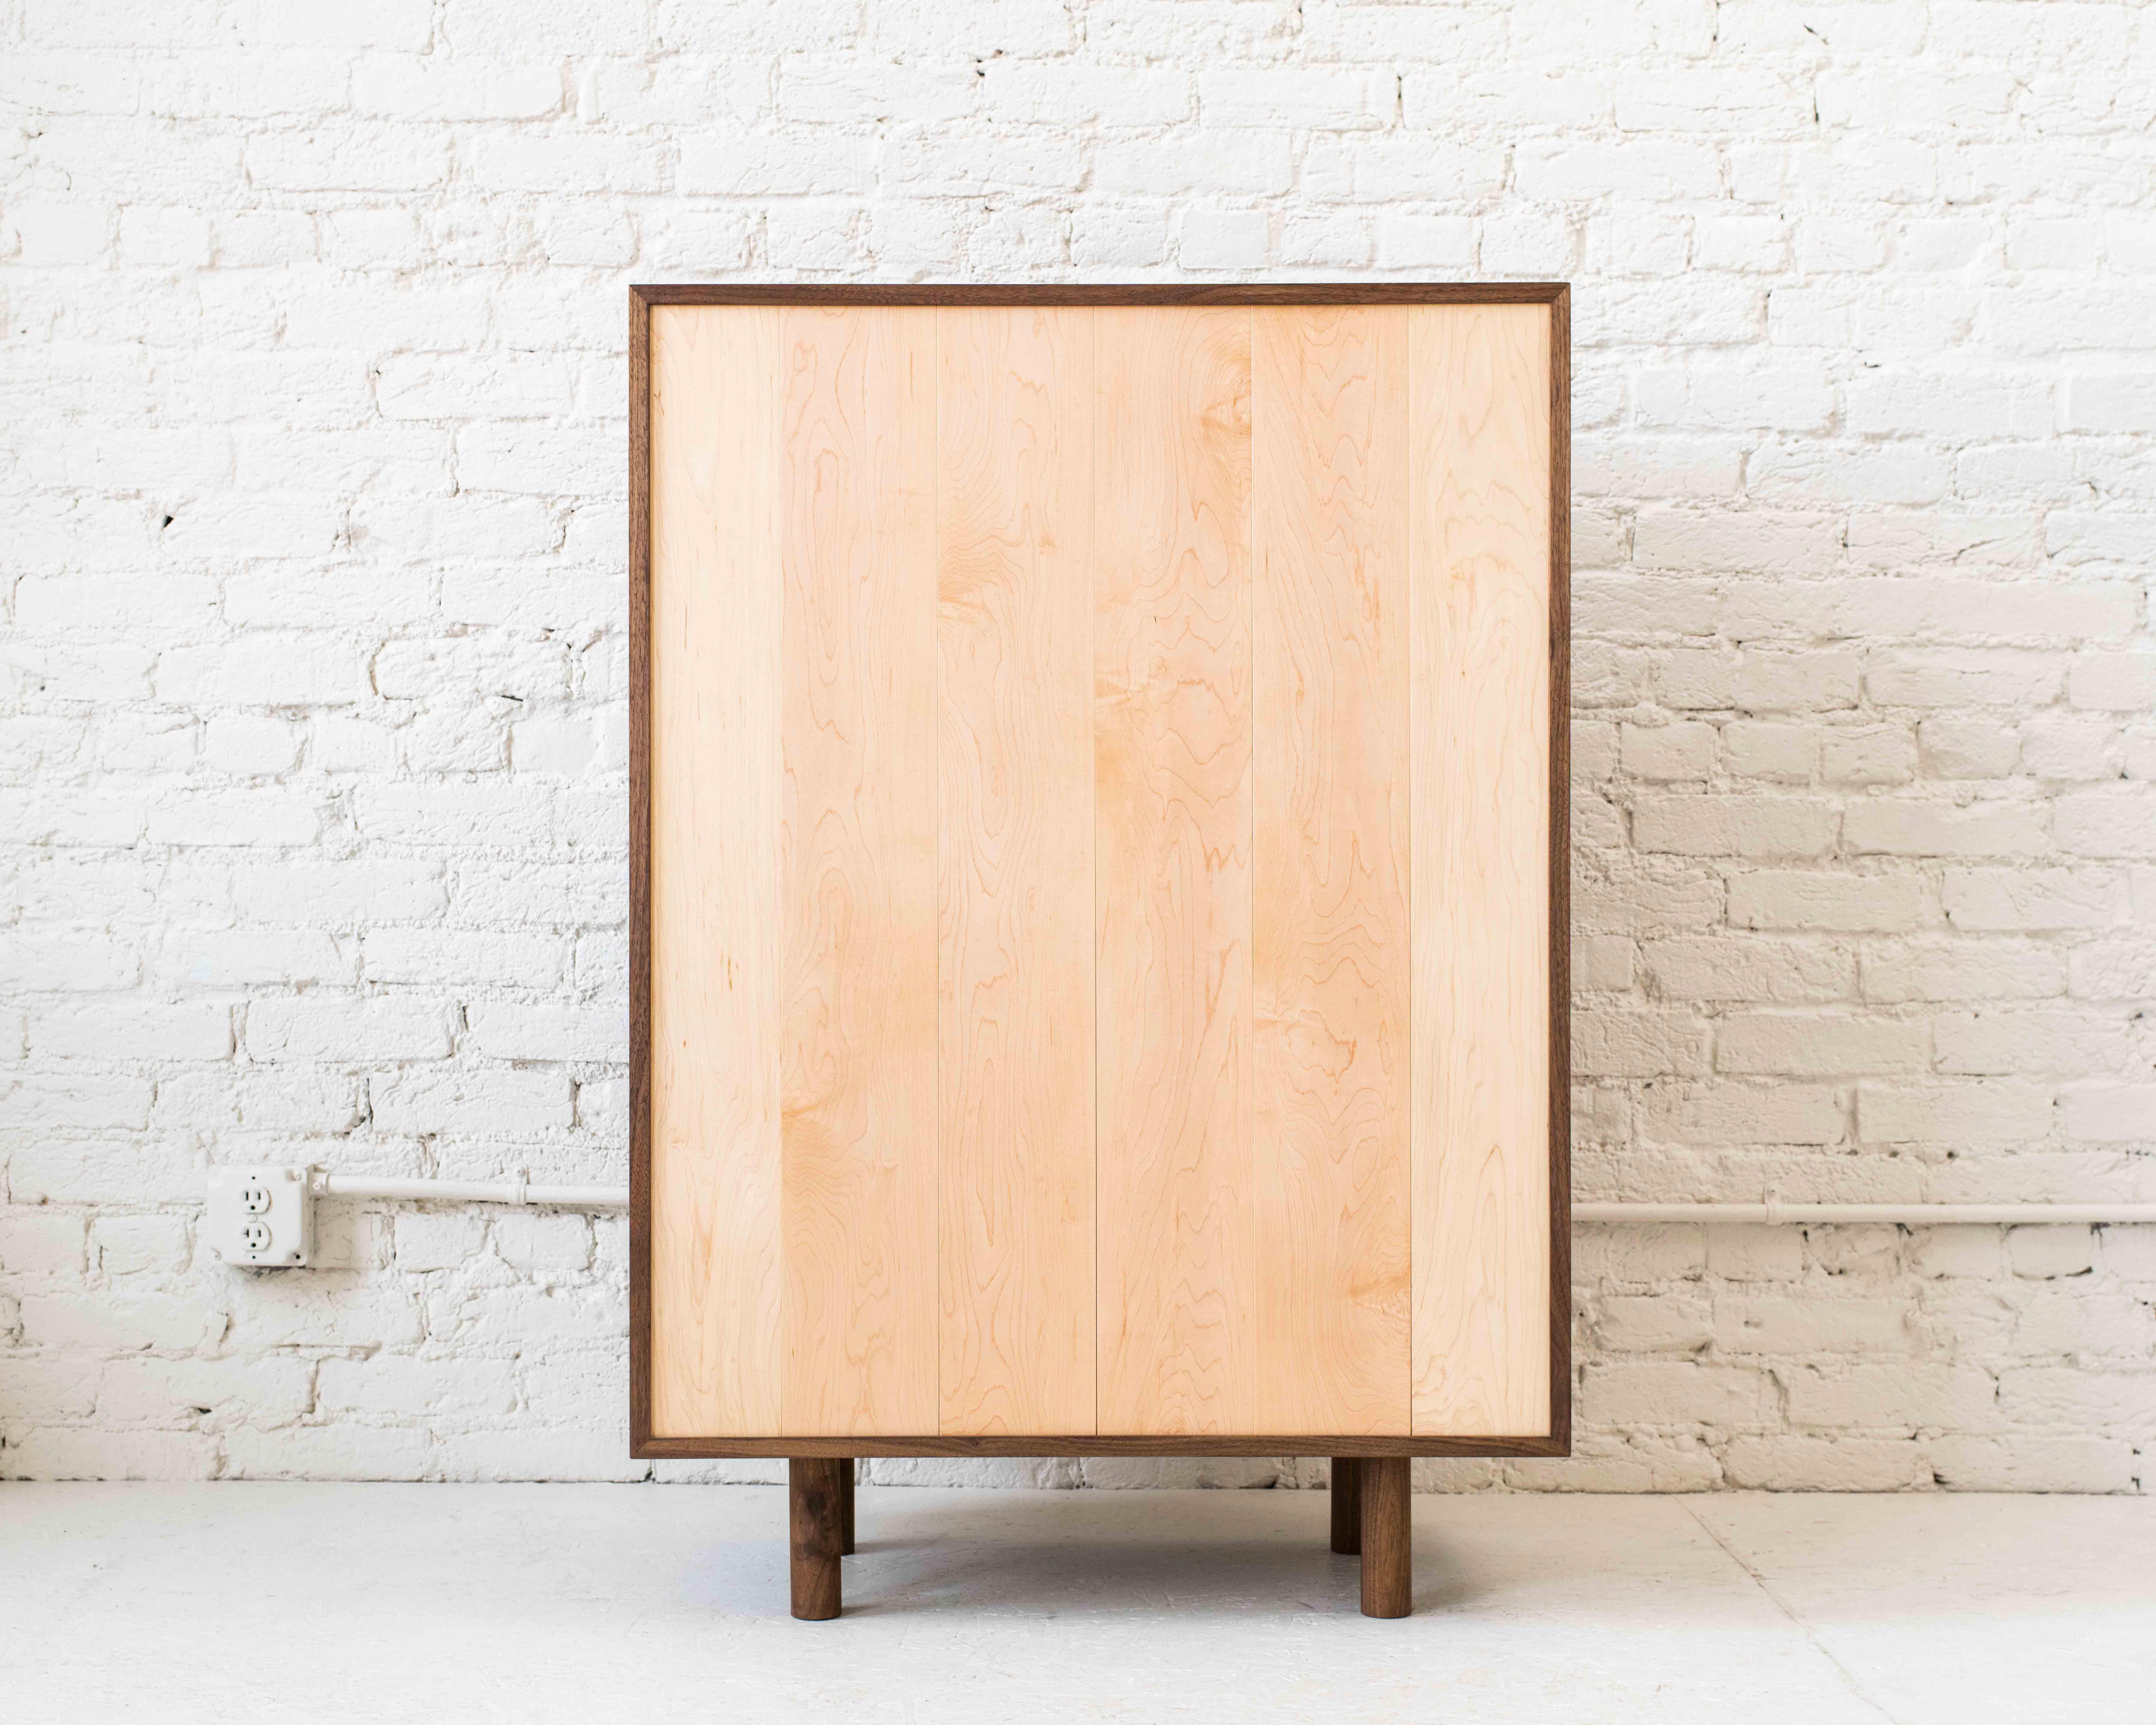 Storage cupboard one by Campagna. Shown in walnut and maple. 

Drawing influence from Shaker cabinetry and Japanese woodworking, this solid wood storage cabinet is minimal in form, showcasing the beauty of the natural wood. With a solid maple back